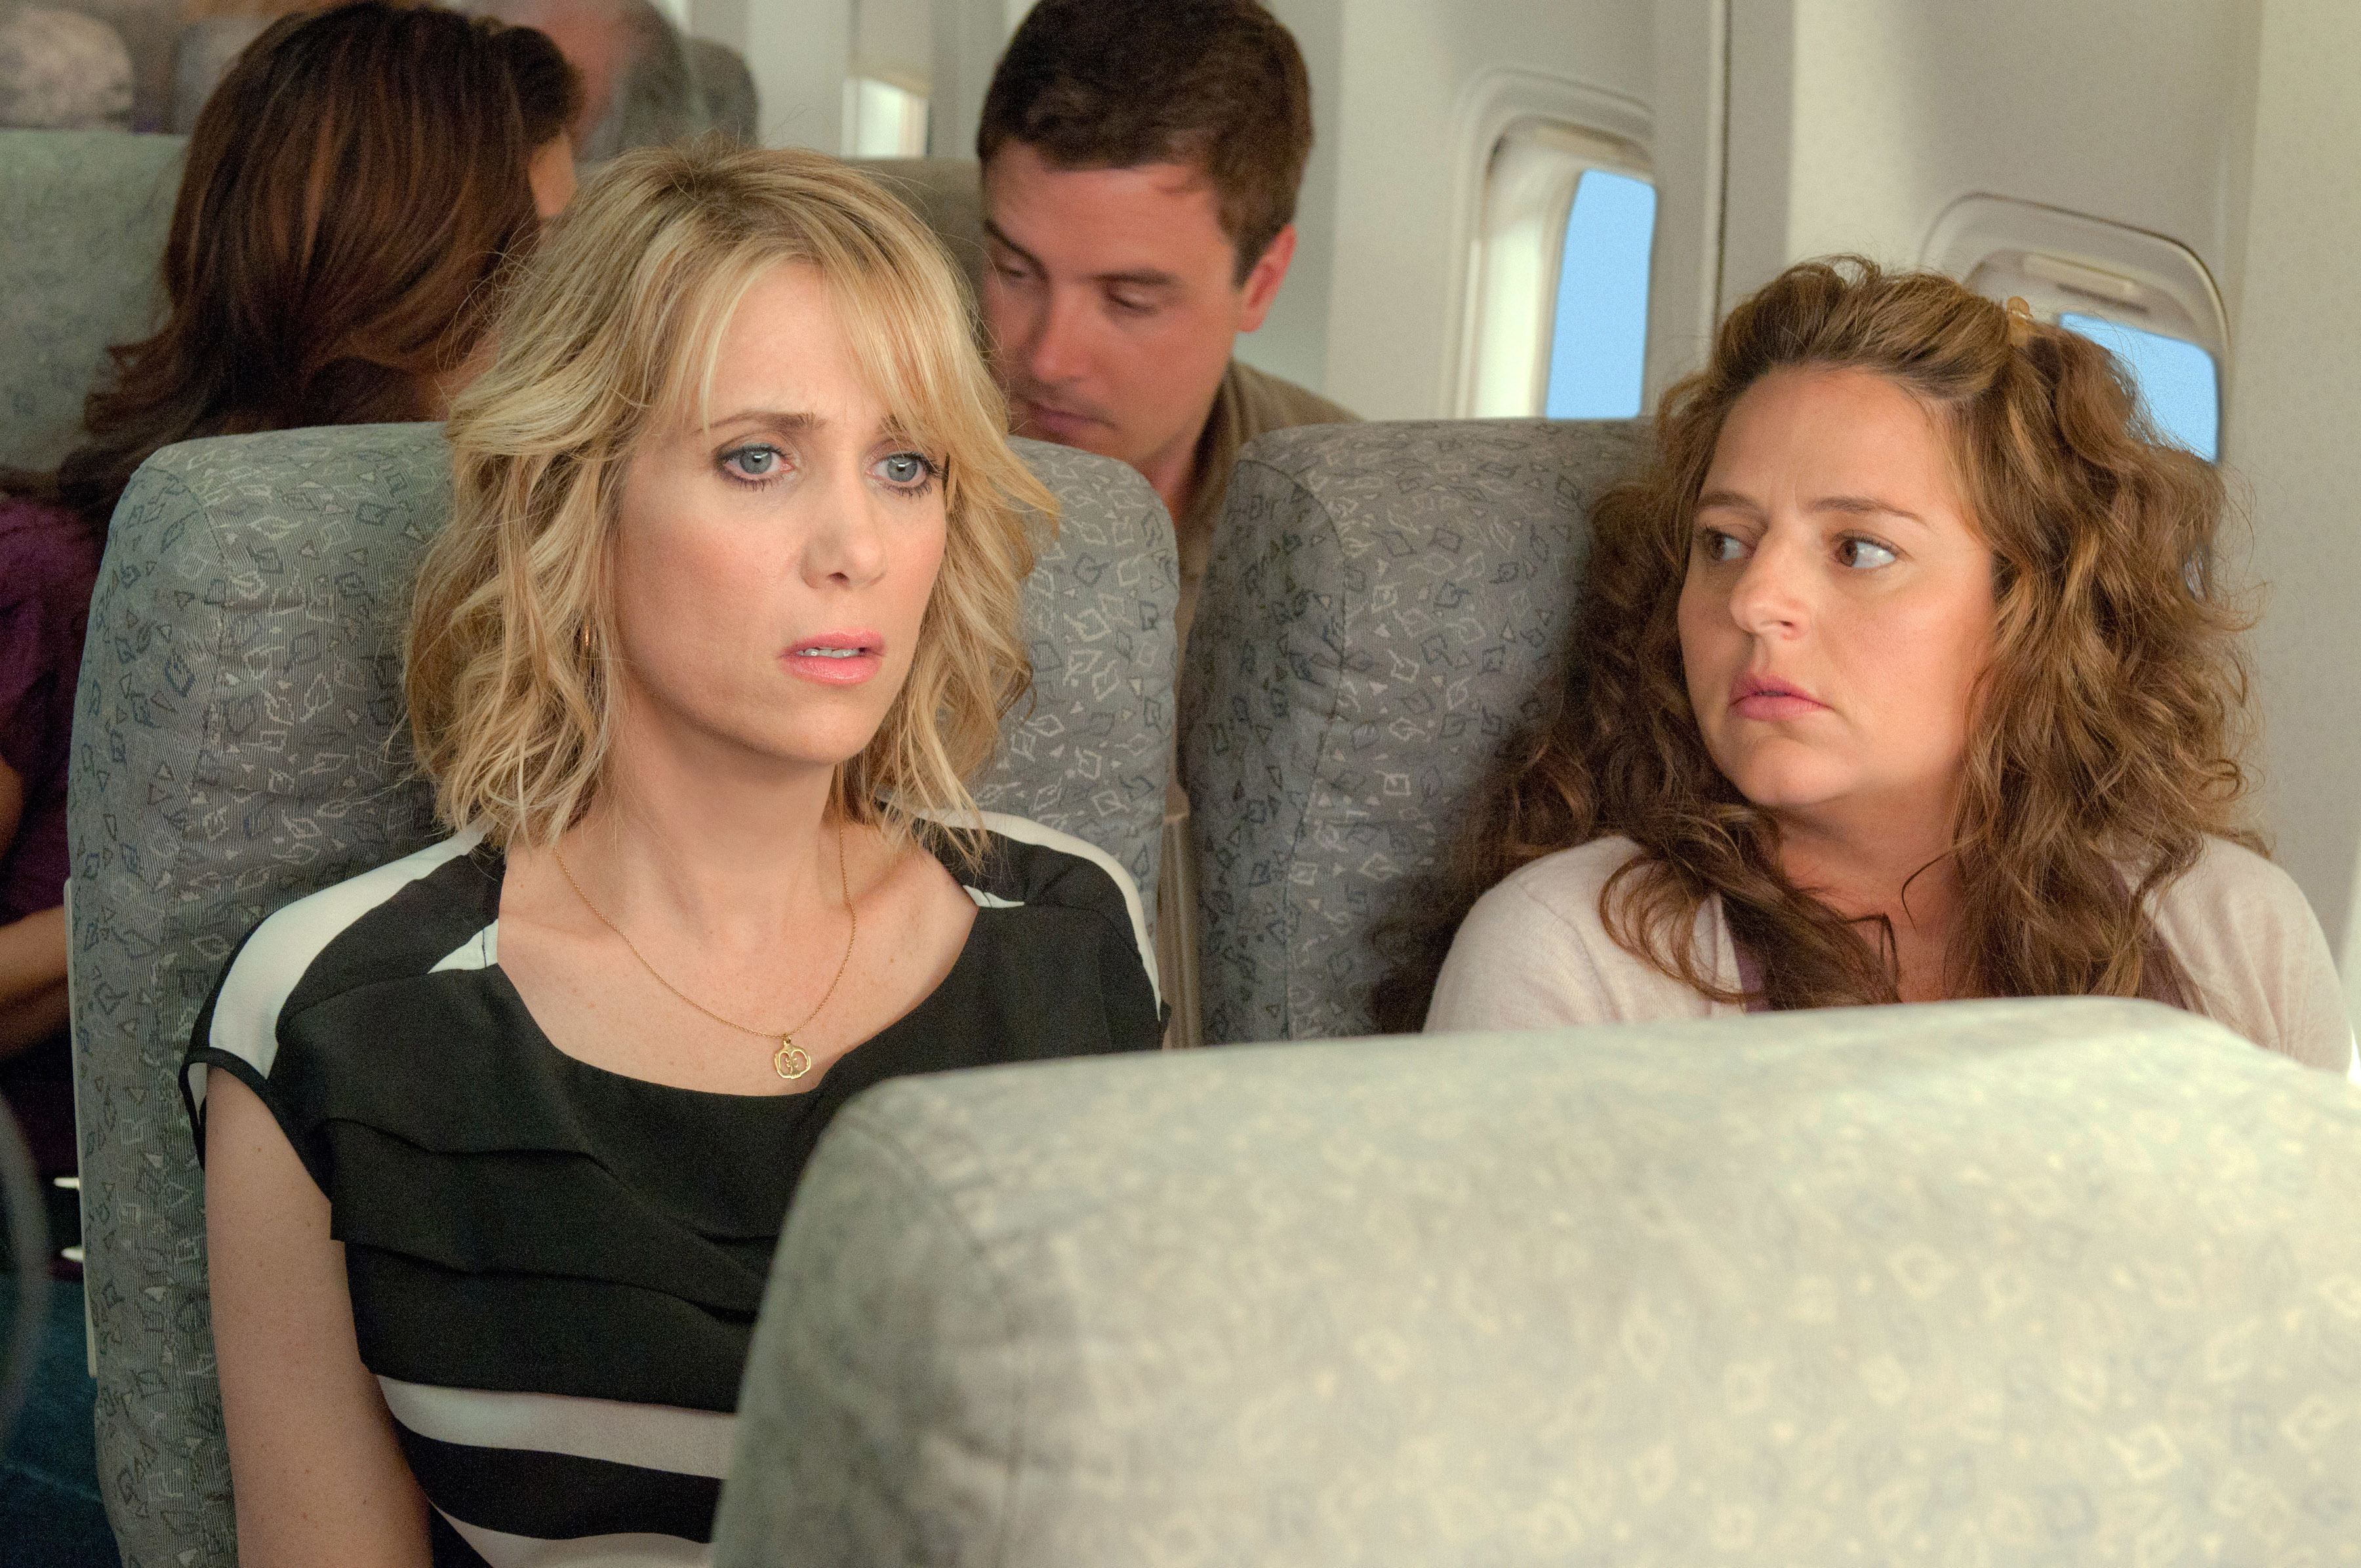 Kristen Wiig seated by Annie Mumolo on a plane during a scene in Bridesmaids